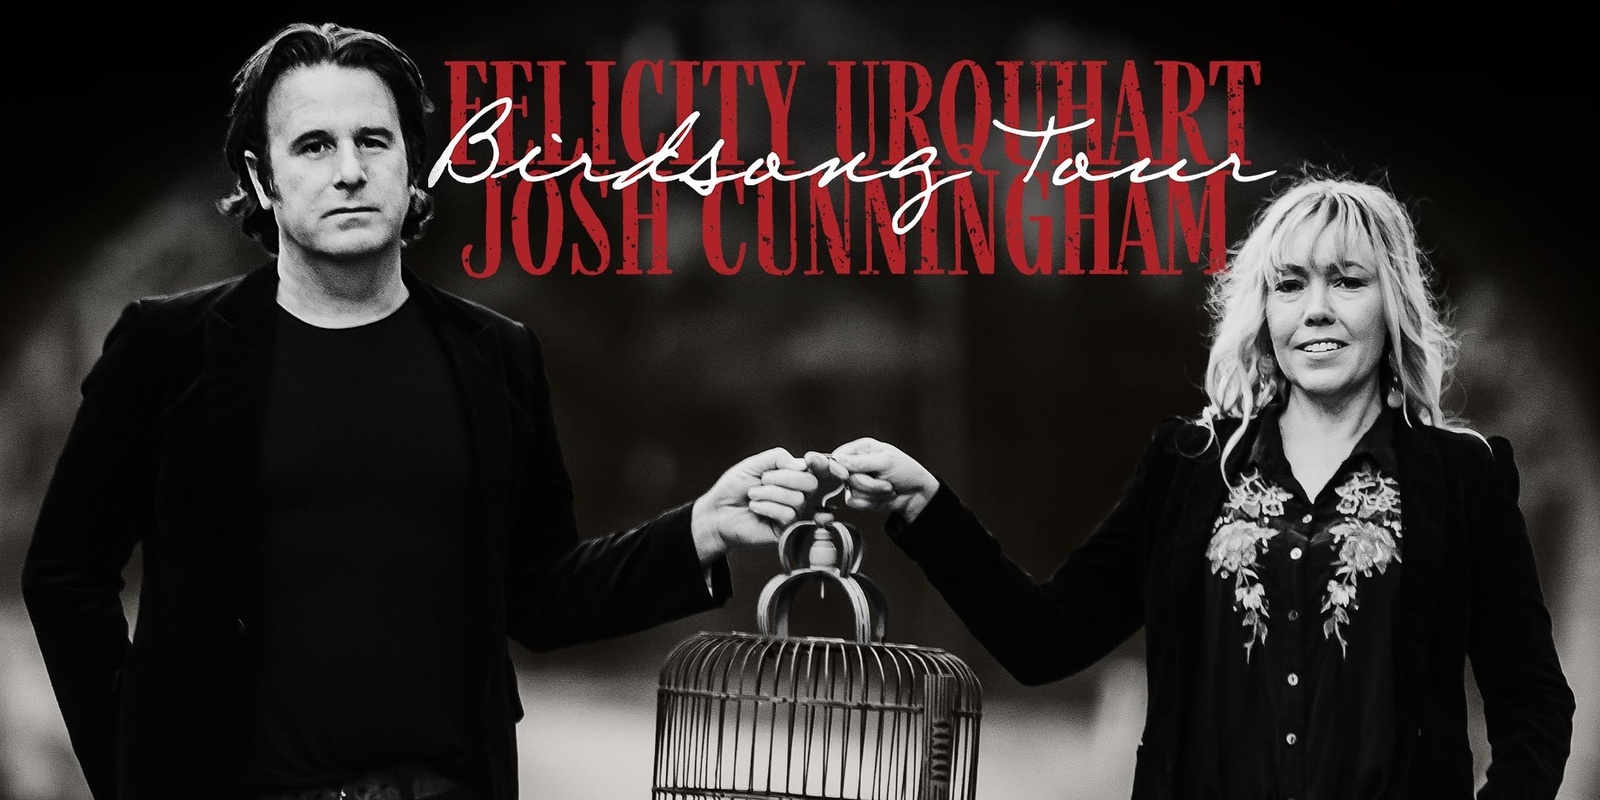 Banner image for Felicity Urquhart and Josh Cunningham ( of The Waifs) 'Birdsong' Tour